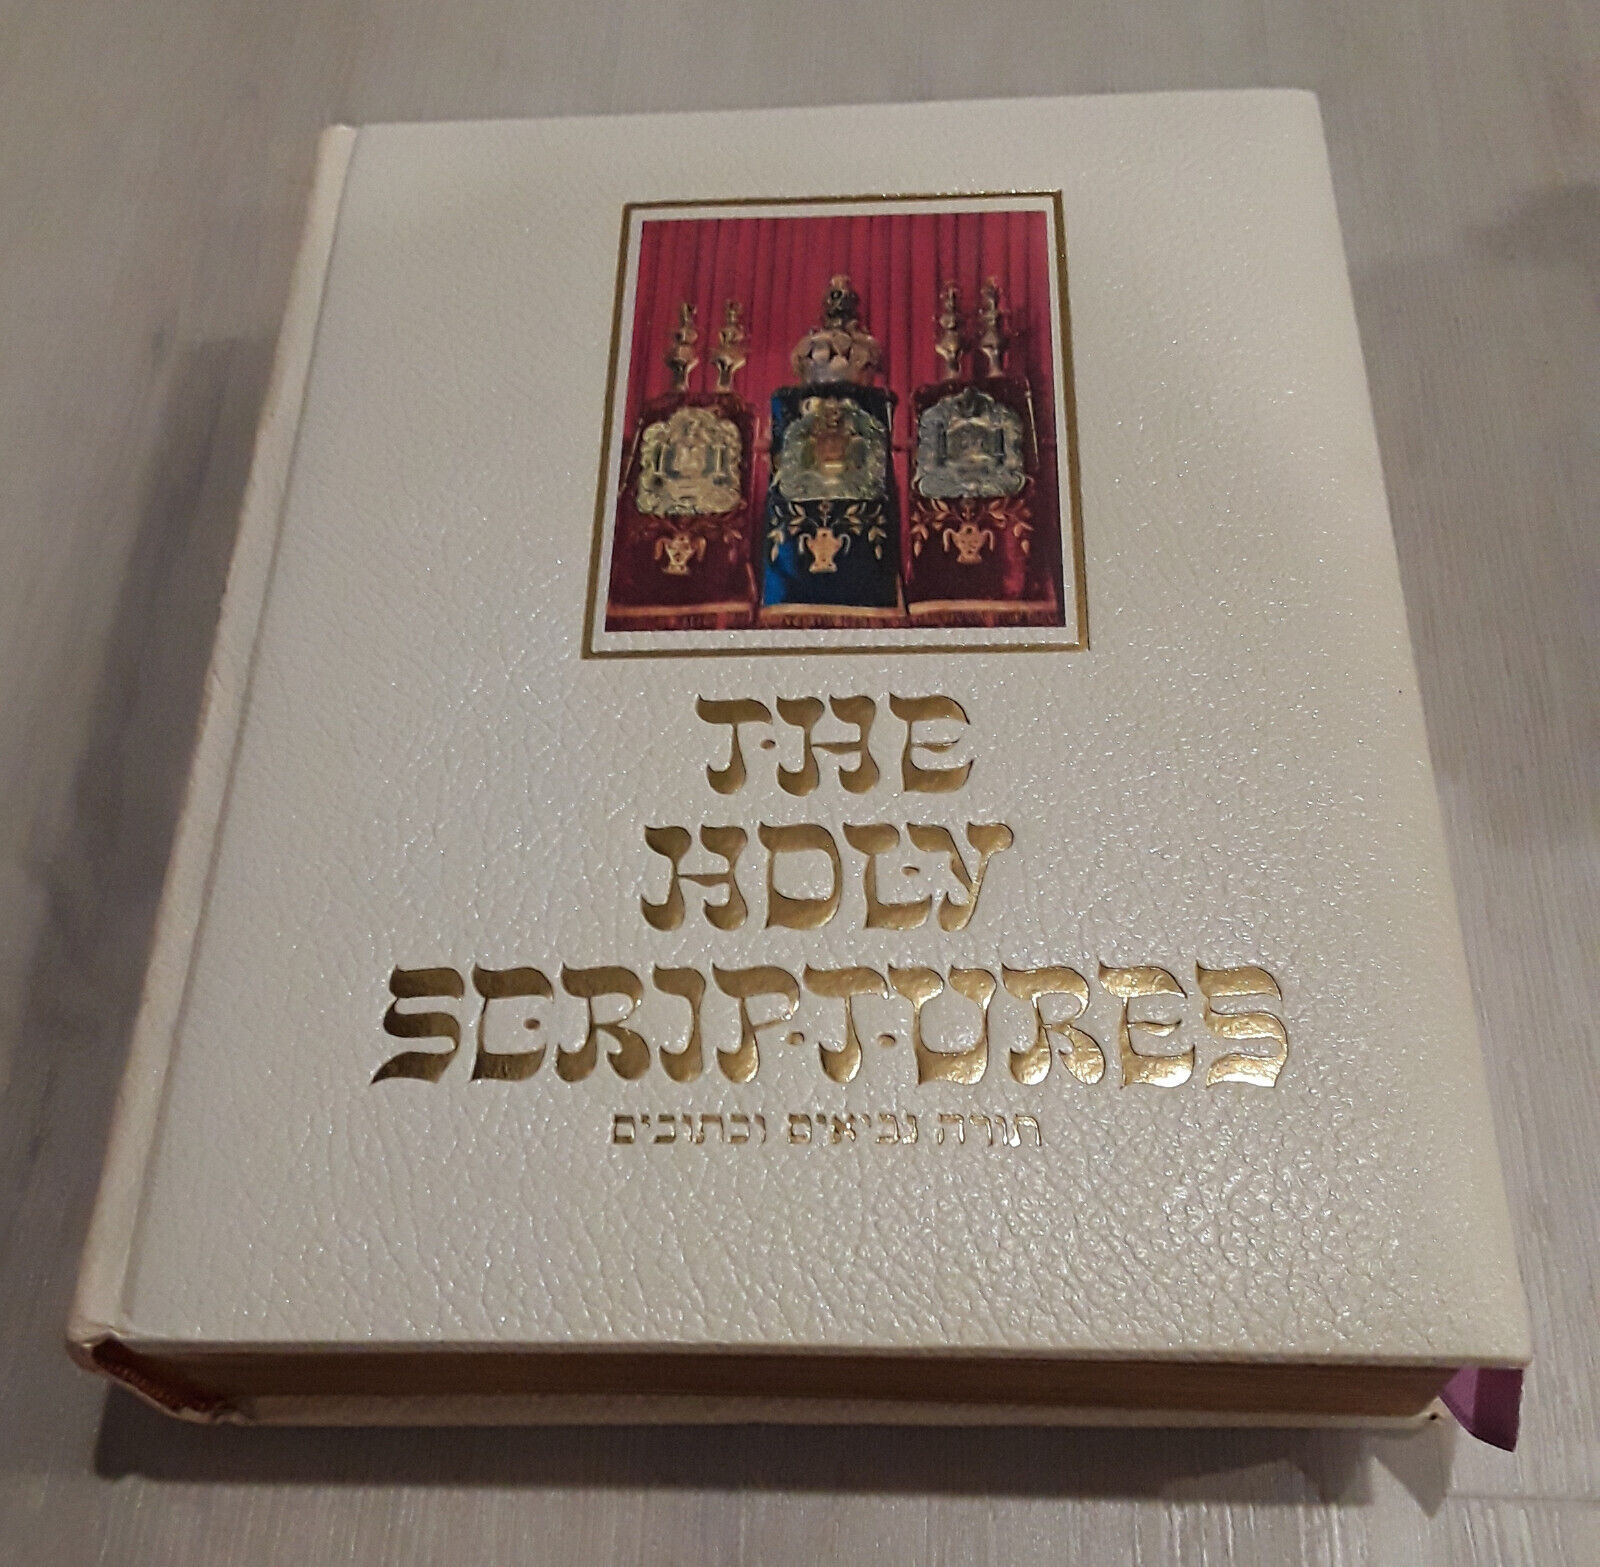 The Holy Scriptures According to the Masoretic Text (Menorah Press, 1973)